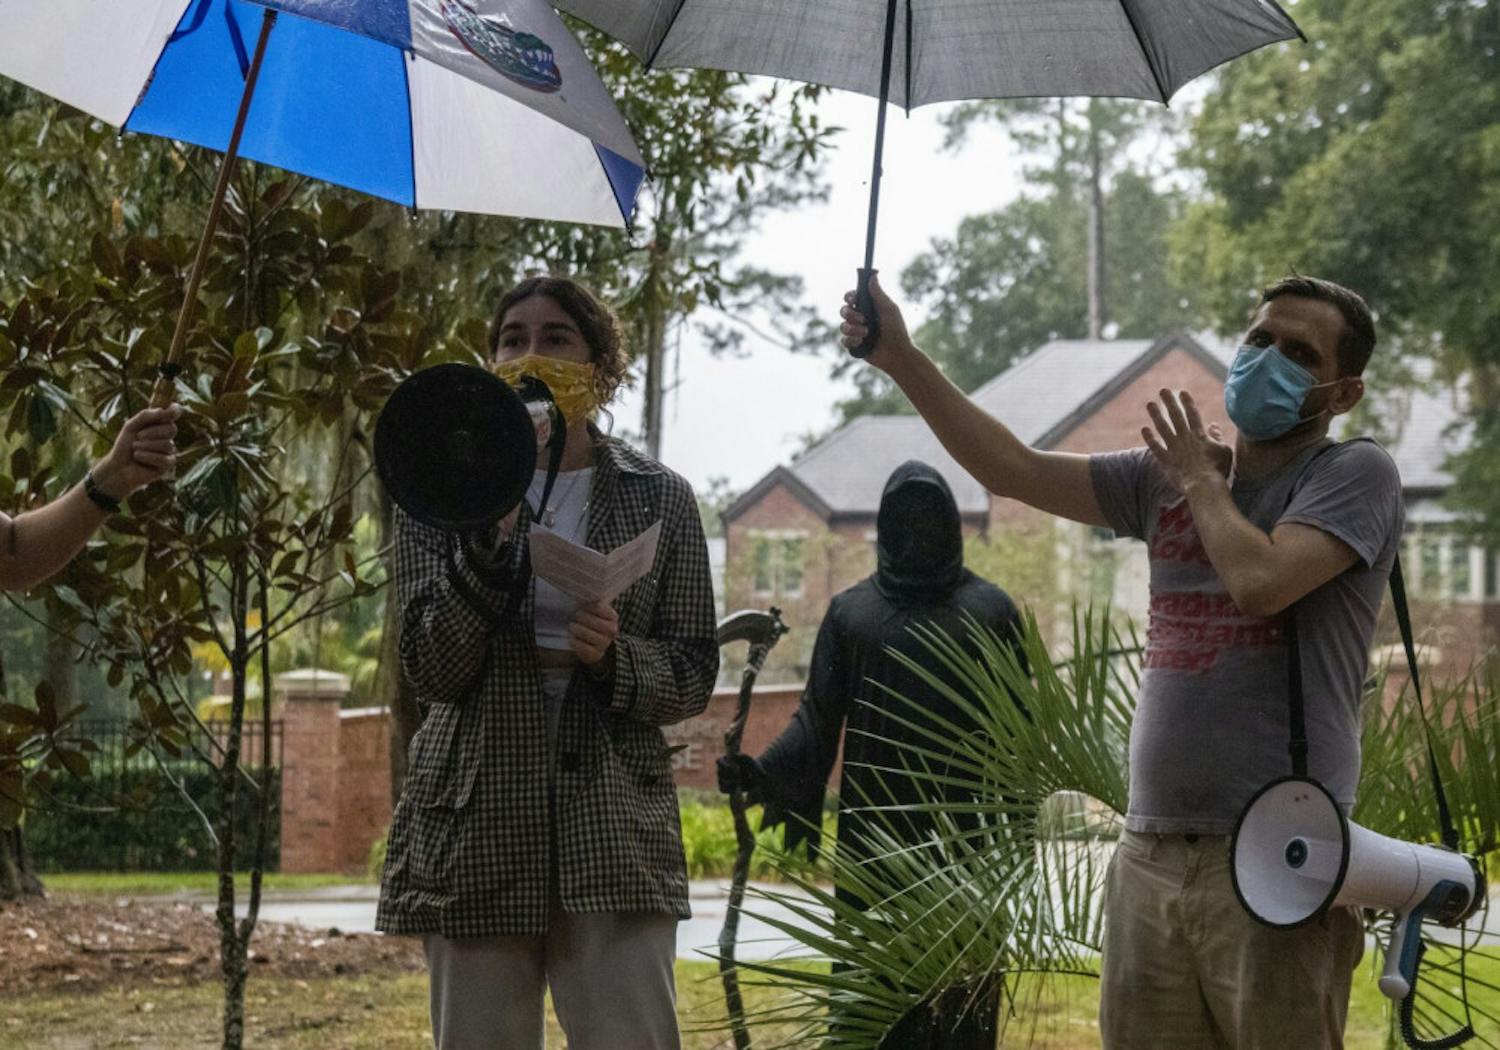 Cristina Cabada, the Alachua County Labor Coalition Coordinator, speaks to a crowd assembled across the street from the Dasburg House during a protest against in-person classes this spring at UF, on Sunday, Nov. 1, 2020.
&nbsp;